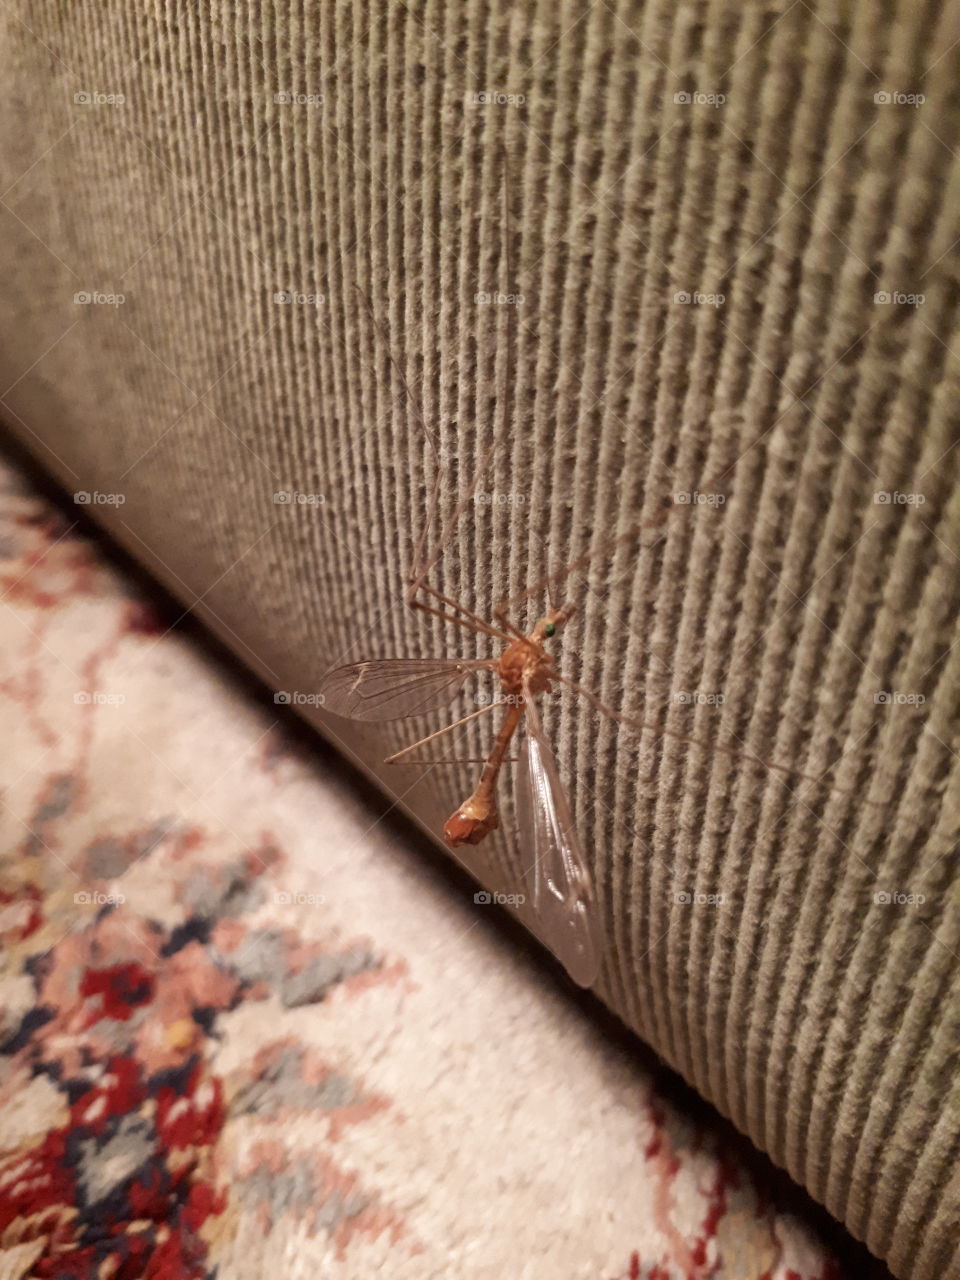 Insect on the couch